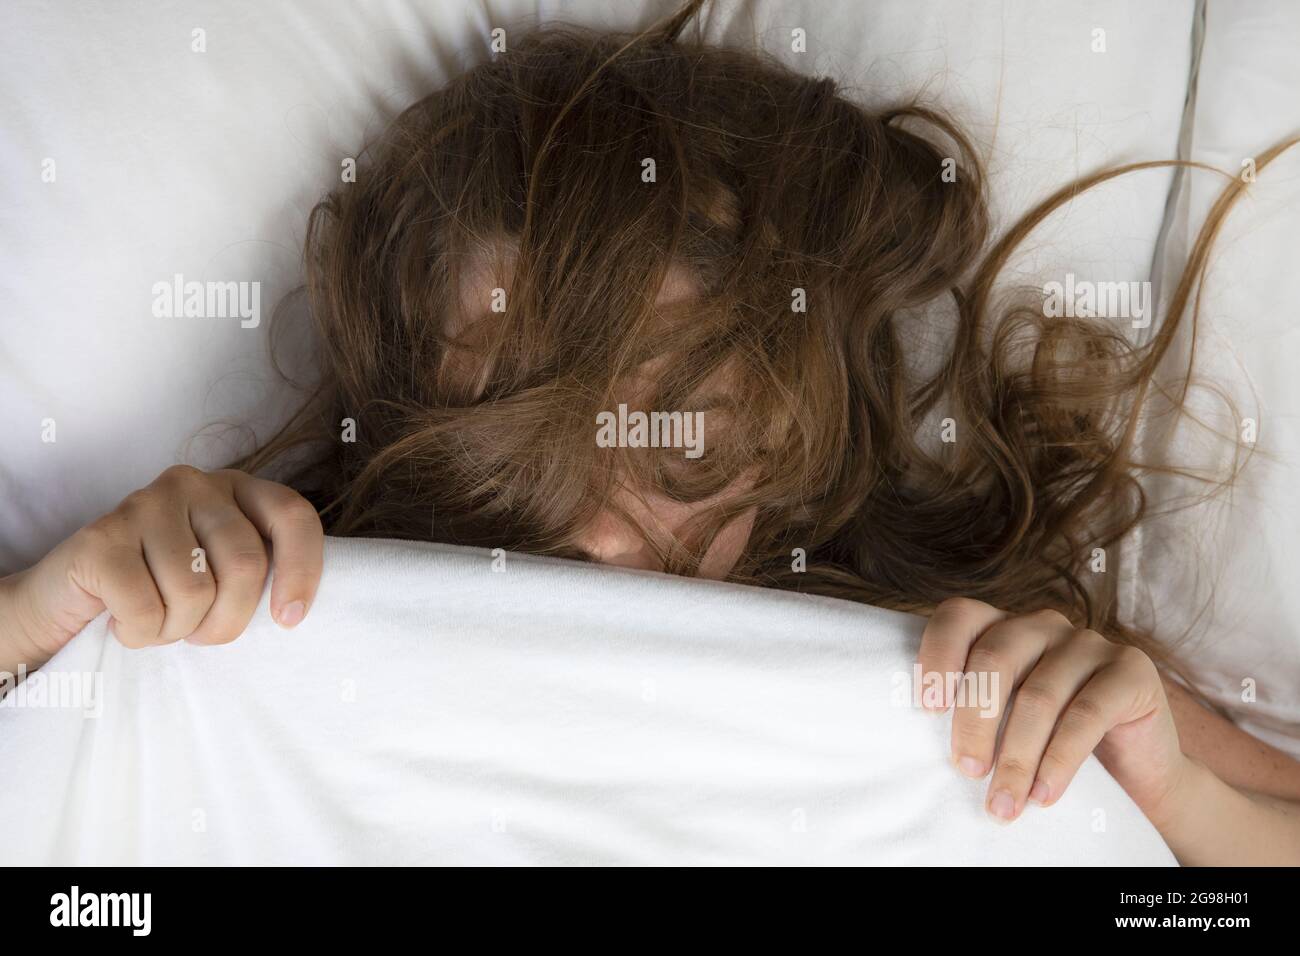 Beautiful young woman sleeping in bed with messy brown hair top view, lying with white bed sheets and freckles Stock Photo